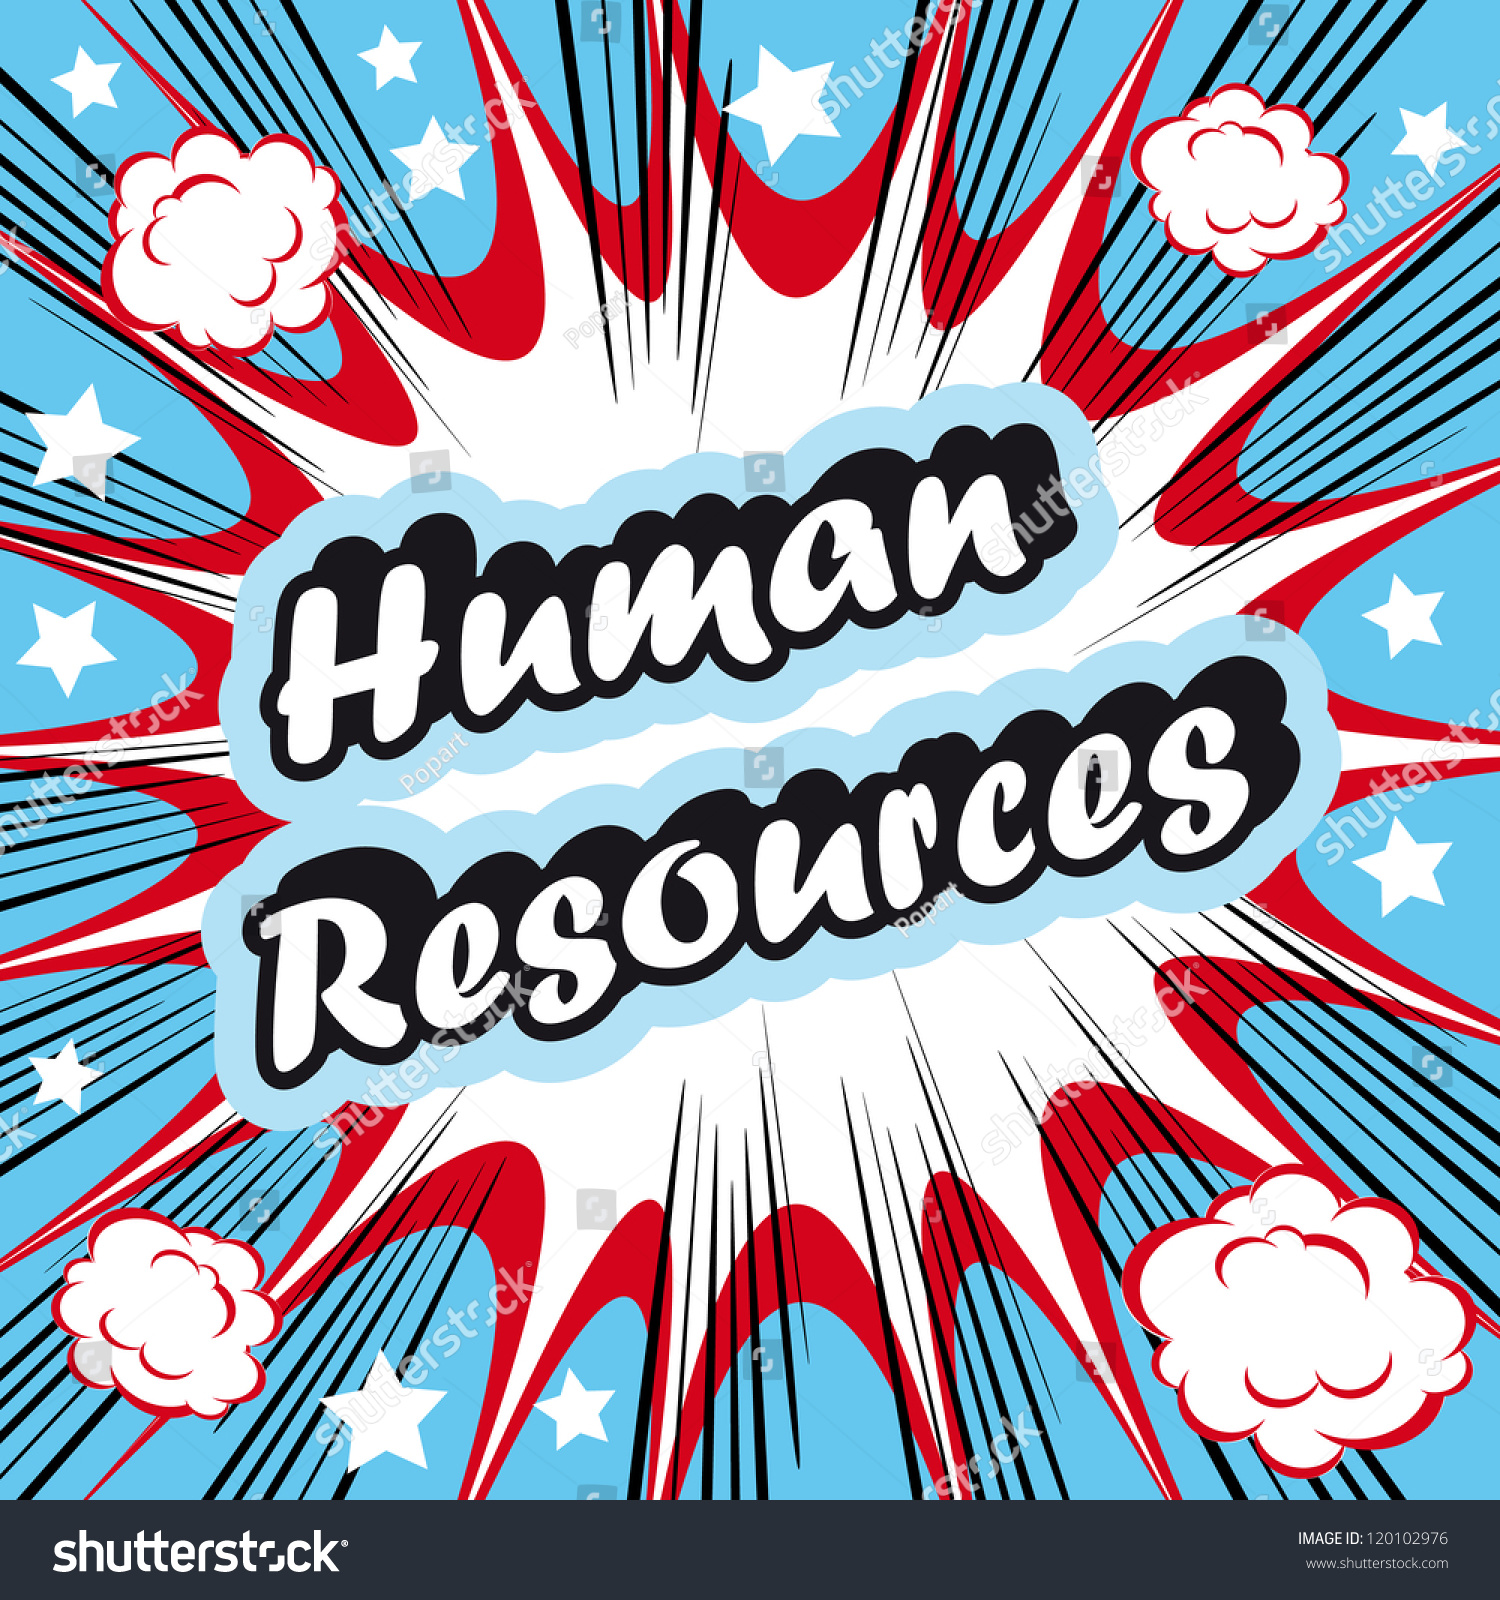 clipart of human resources - photo #28